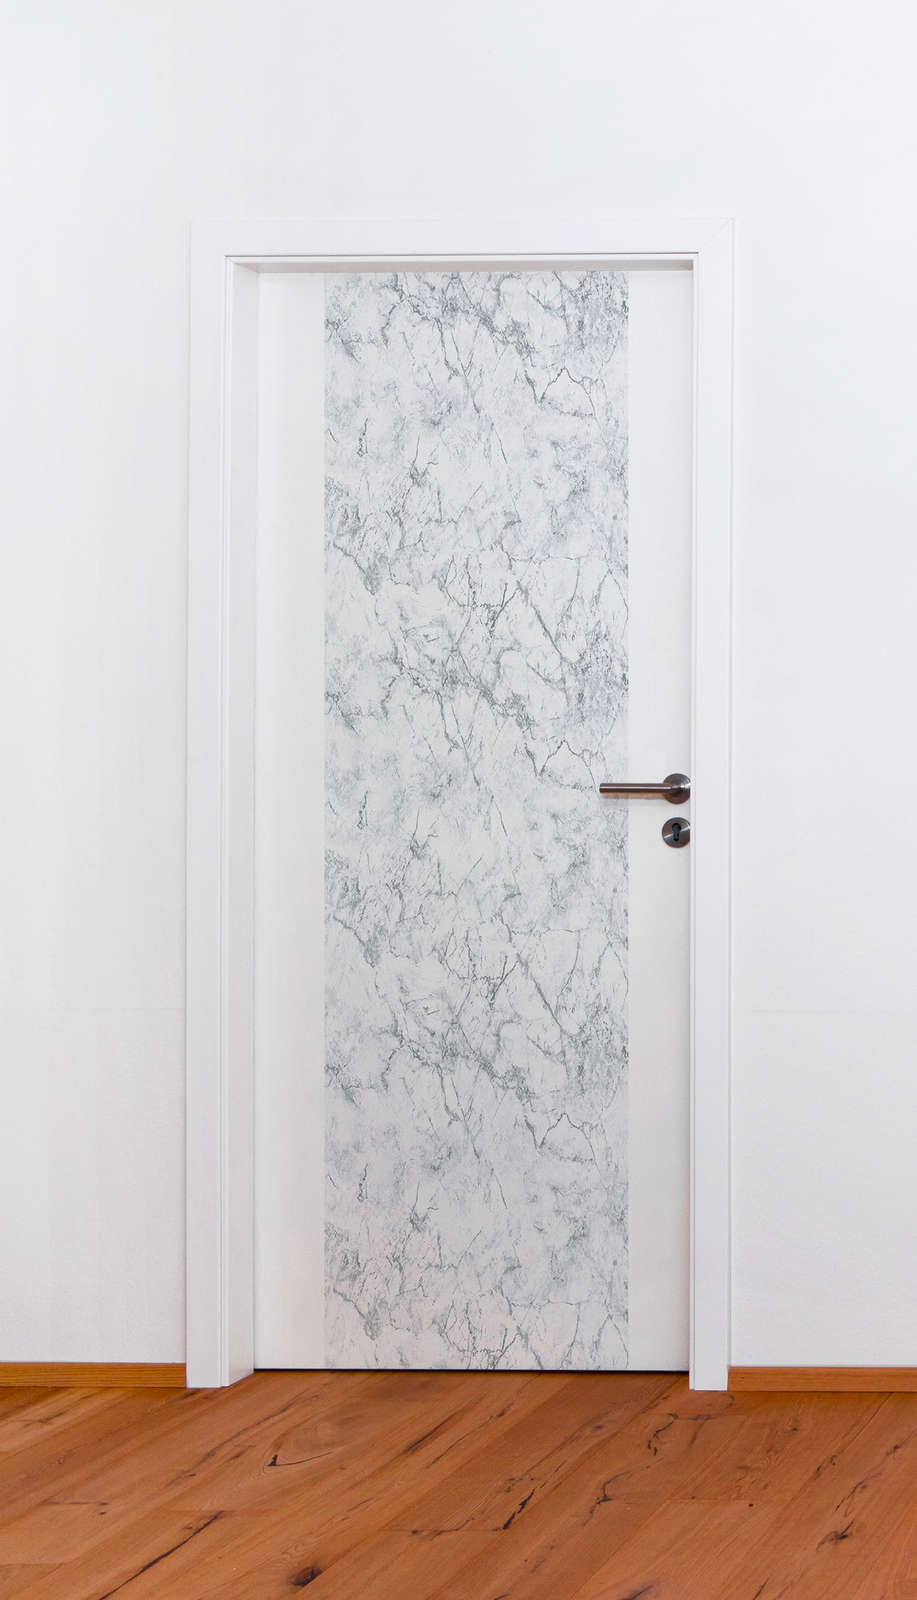             Marble wallpaper marbled stone look - grey, white
        